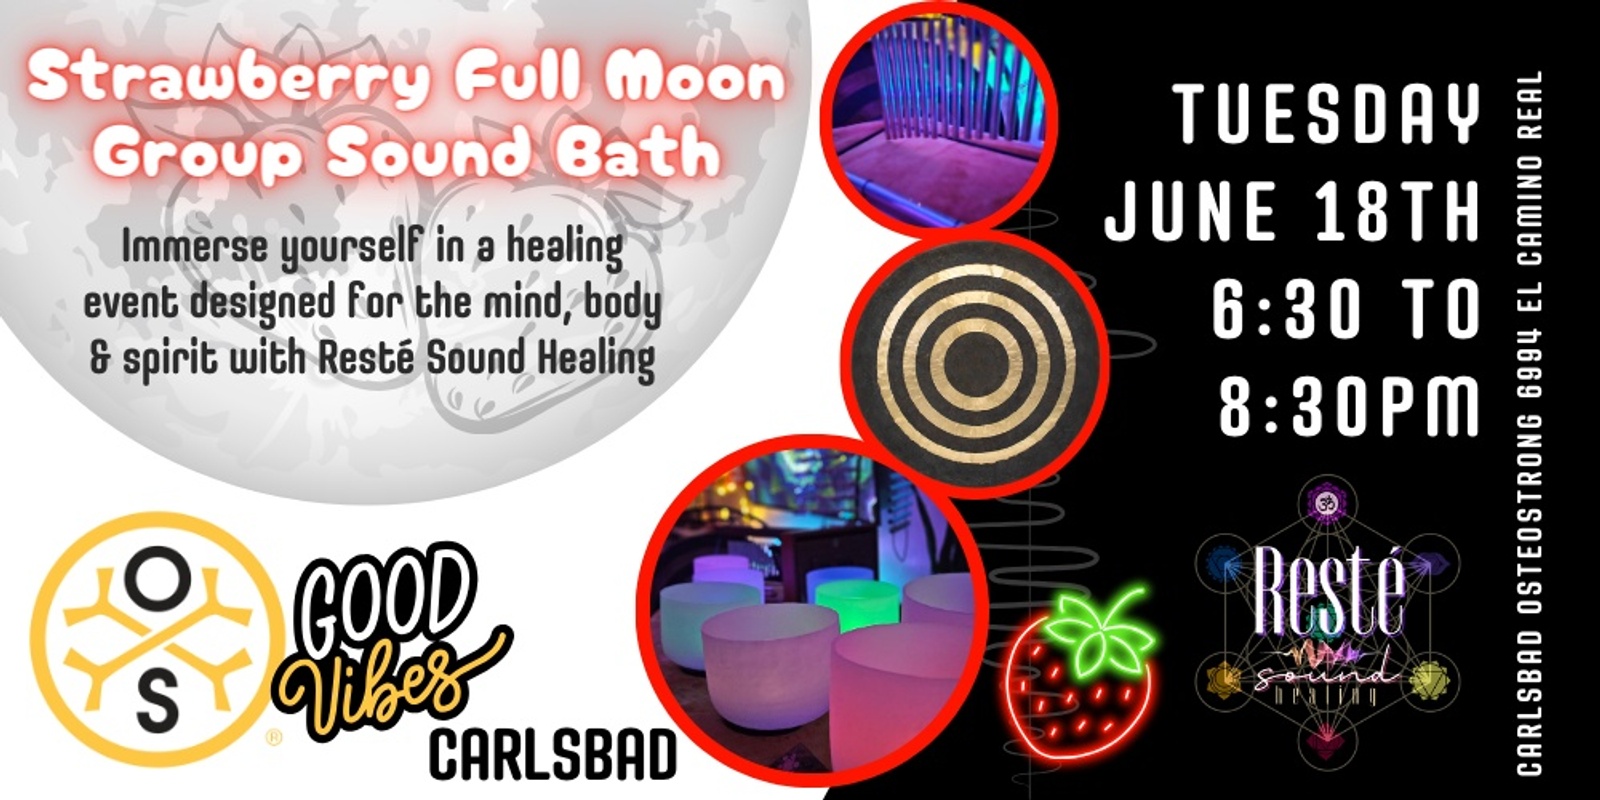 Banner image for OsteoStrong Strawberry Full Moon Sound Bath by Resté Sound Healing